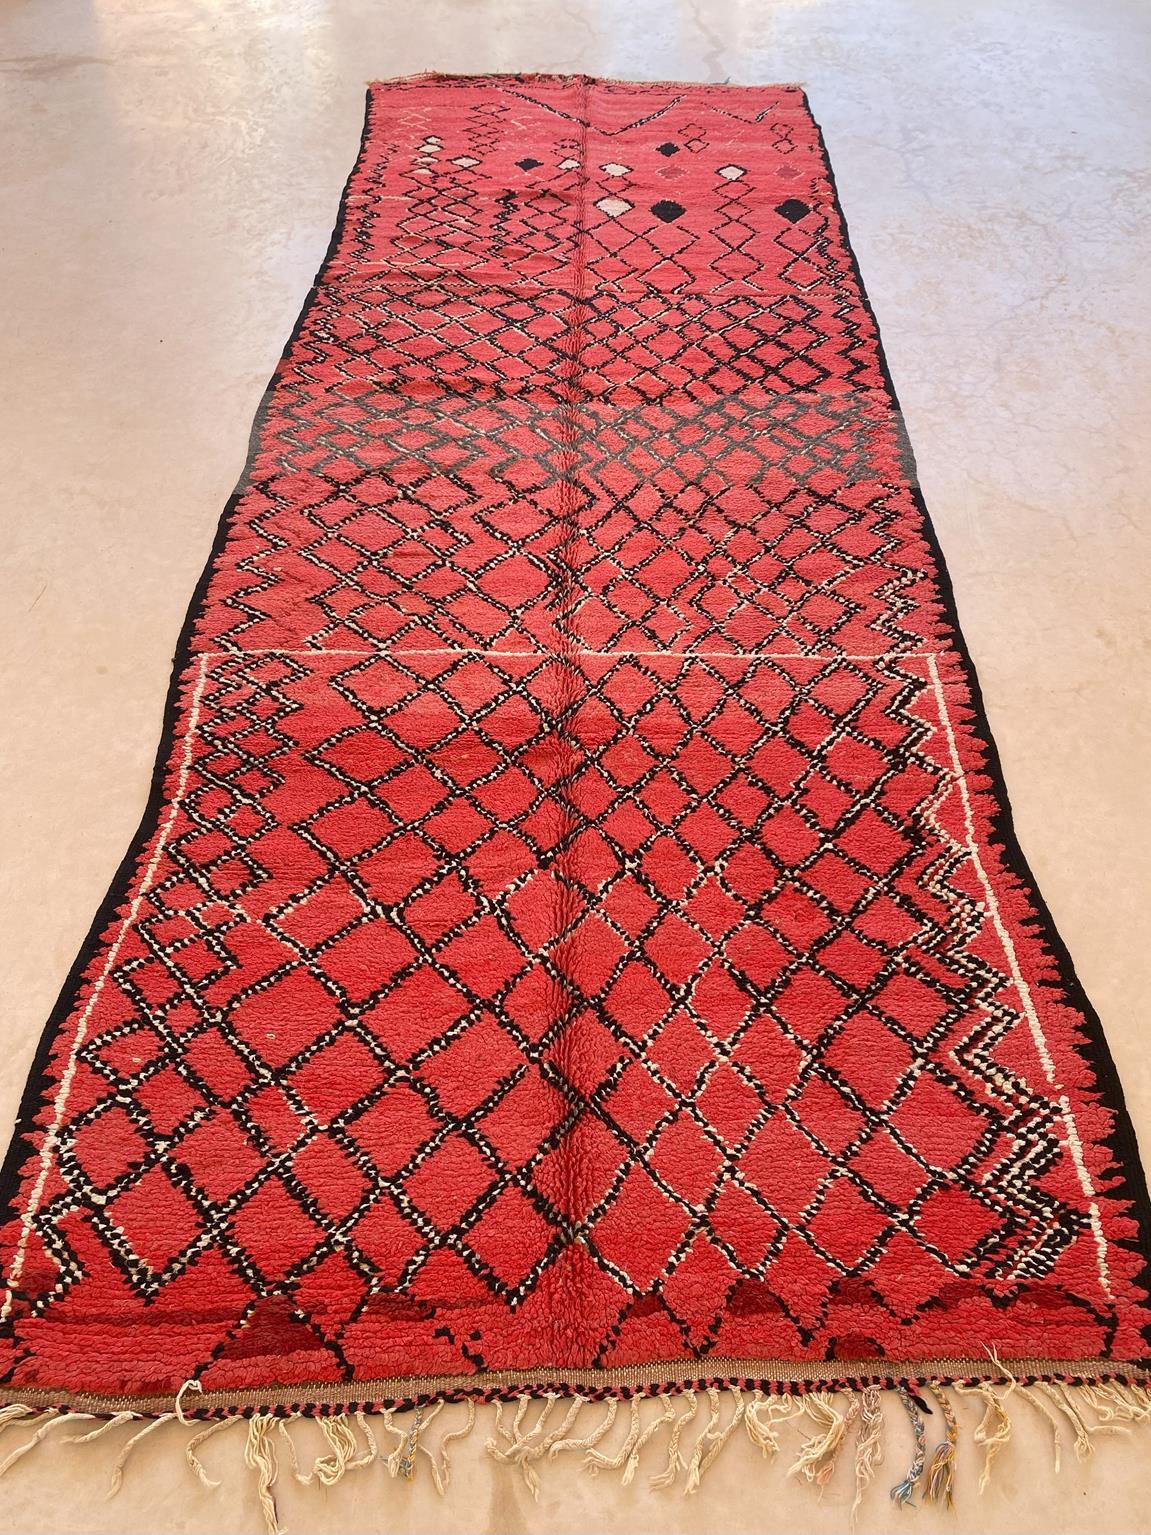 20th Century Vintage Moroccan Azilal rug - Red - 4.9x13.4feet / 151x410cm For Sale